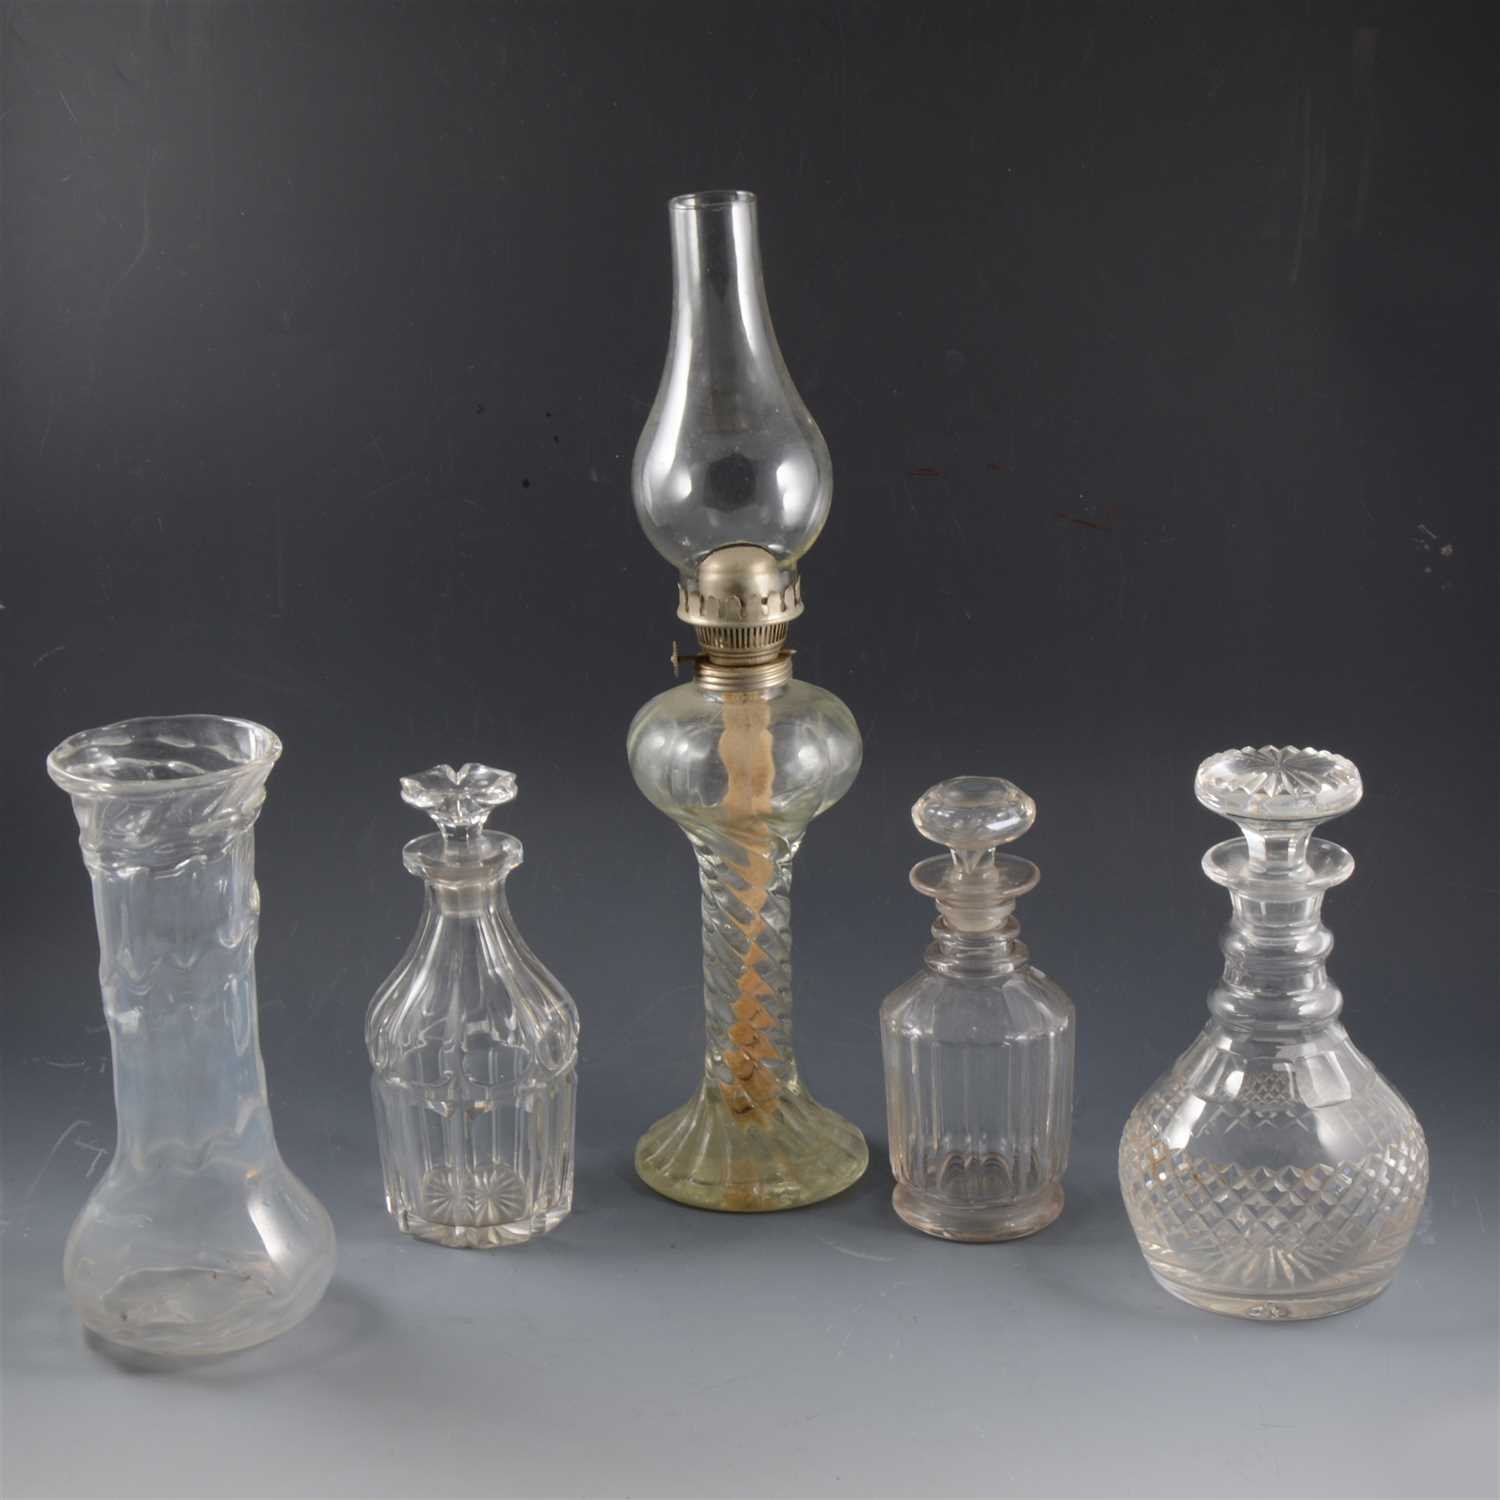 Lot 9 - A pair of 19th Century cut glass decanter; and other glassware.